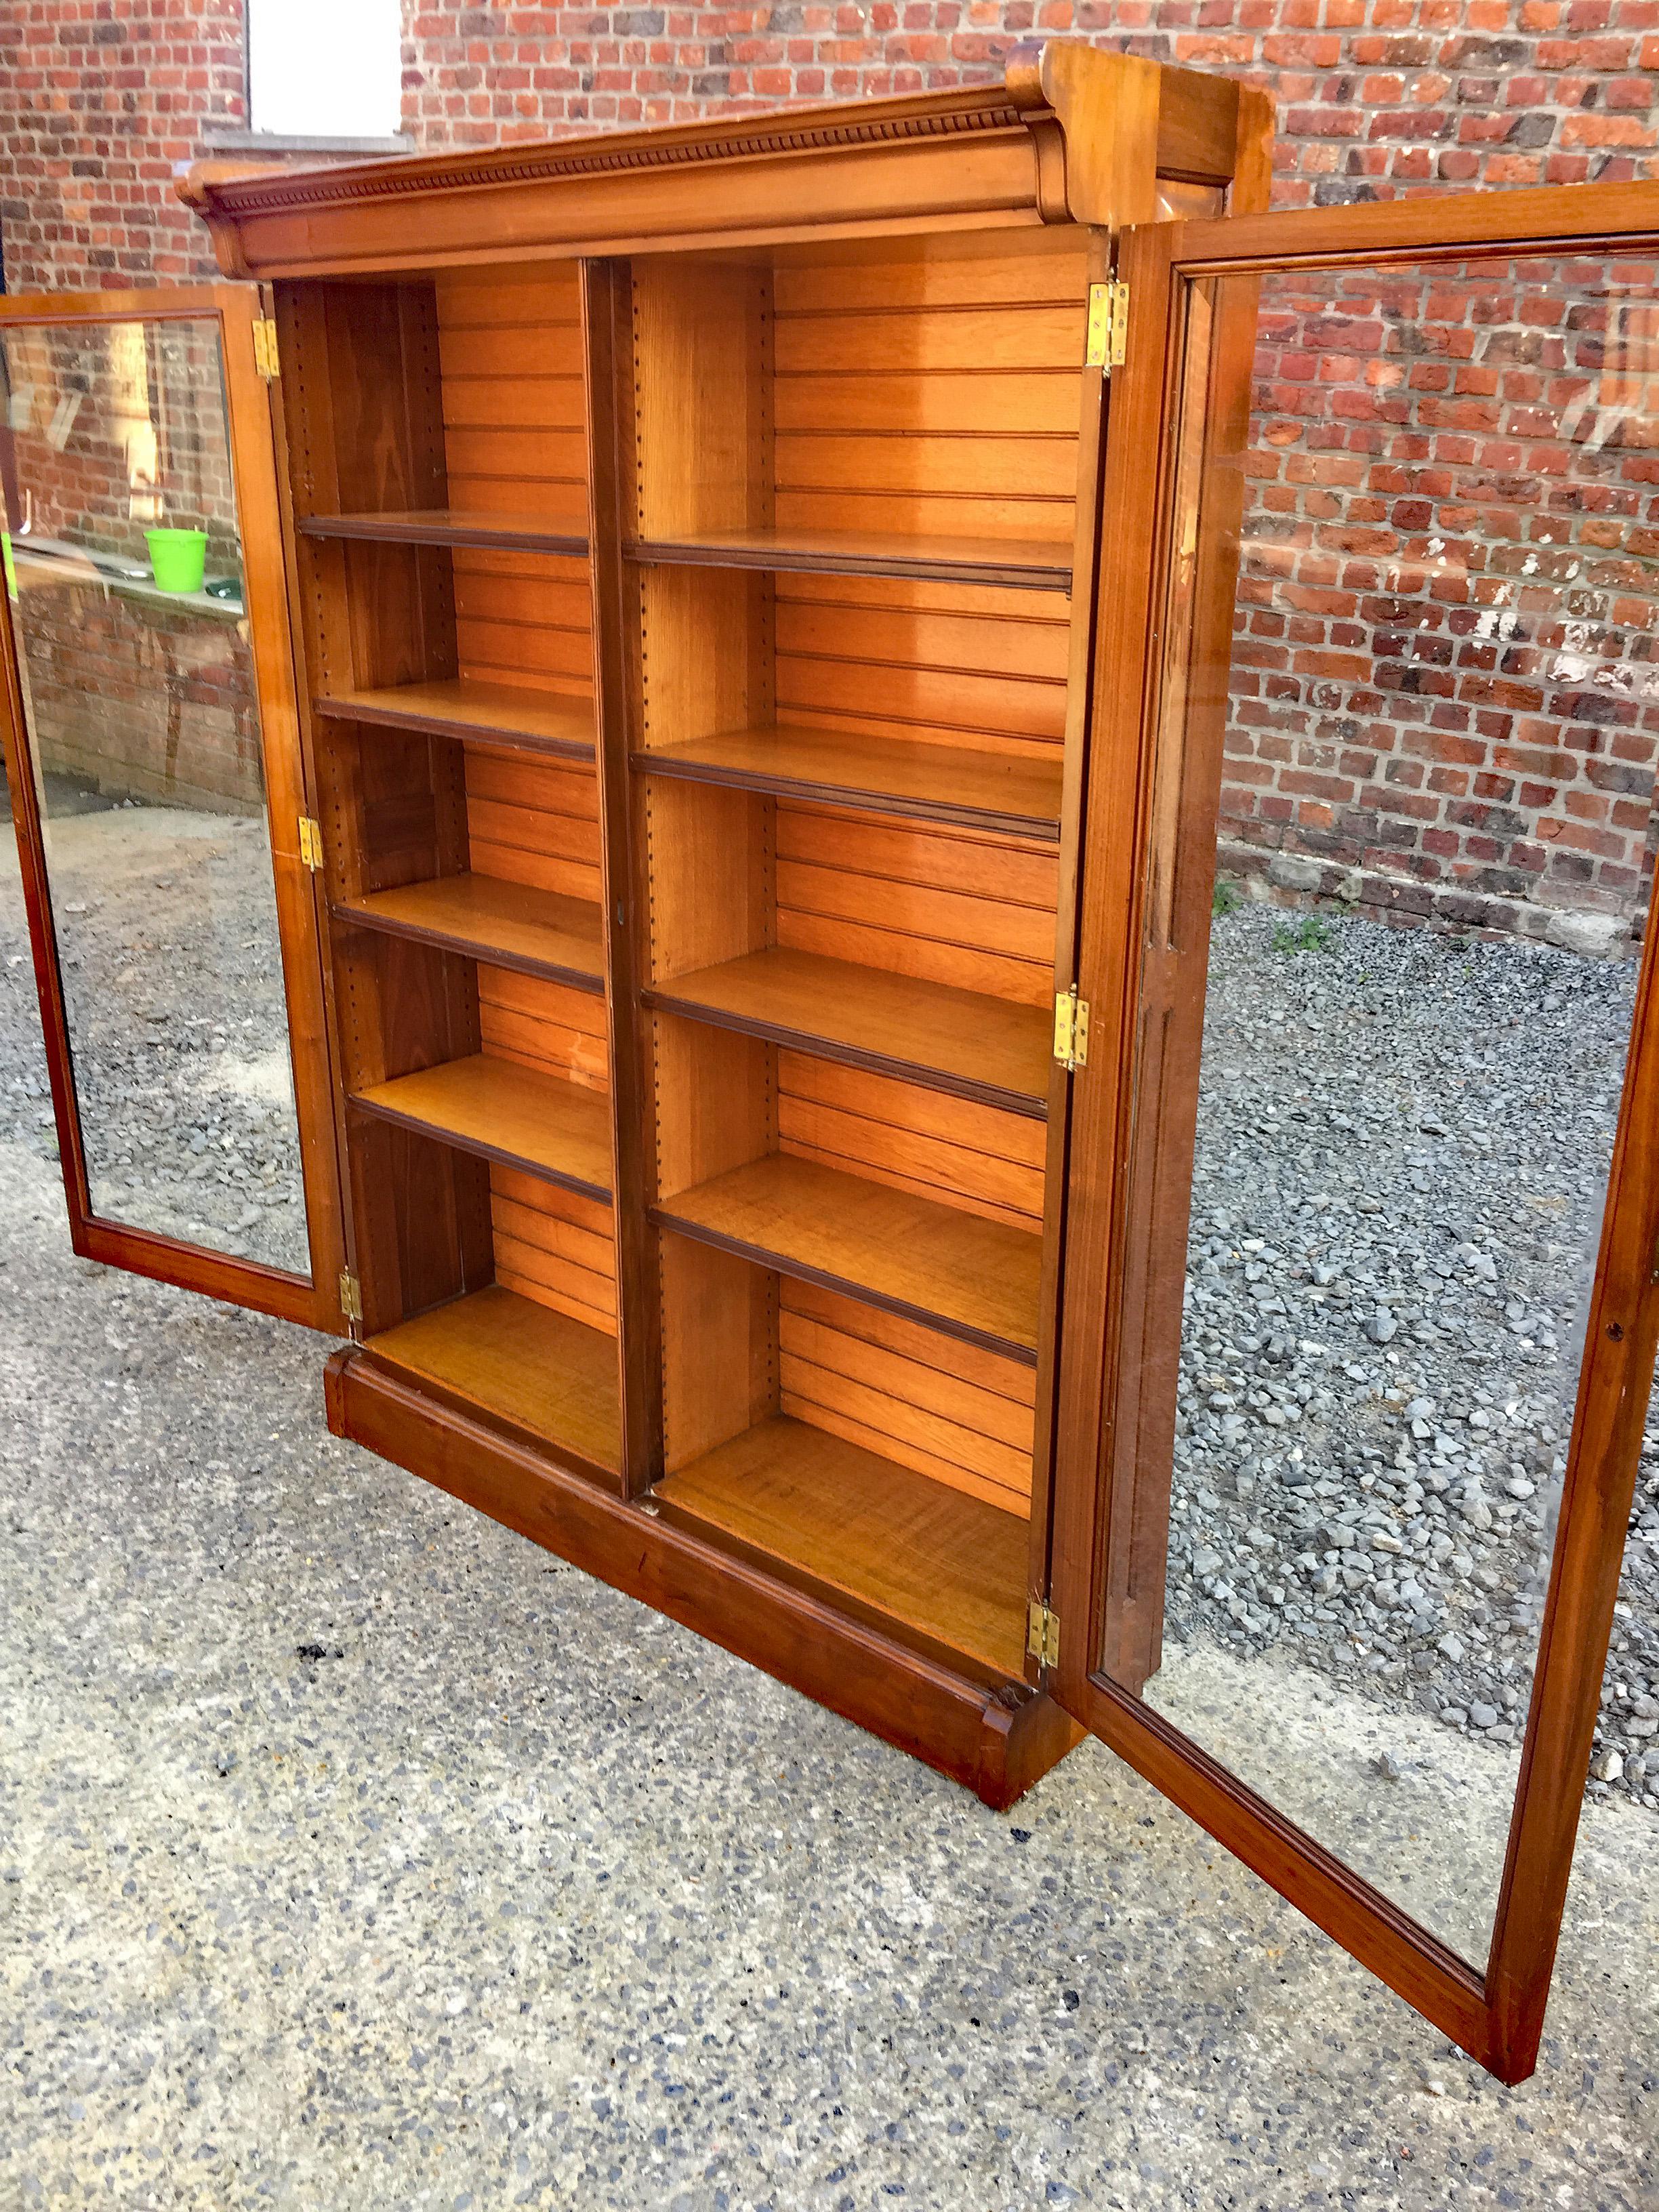 Storage Unit or Library in American Walnut, circa 1900 For Sale 9